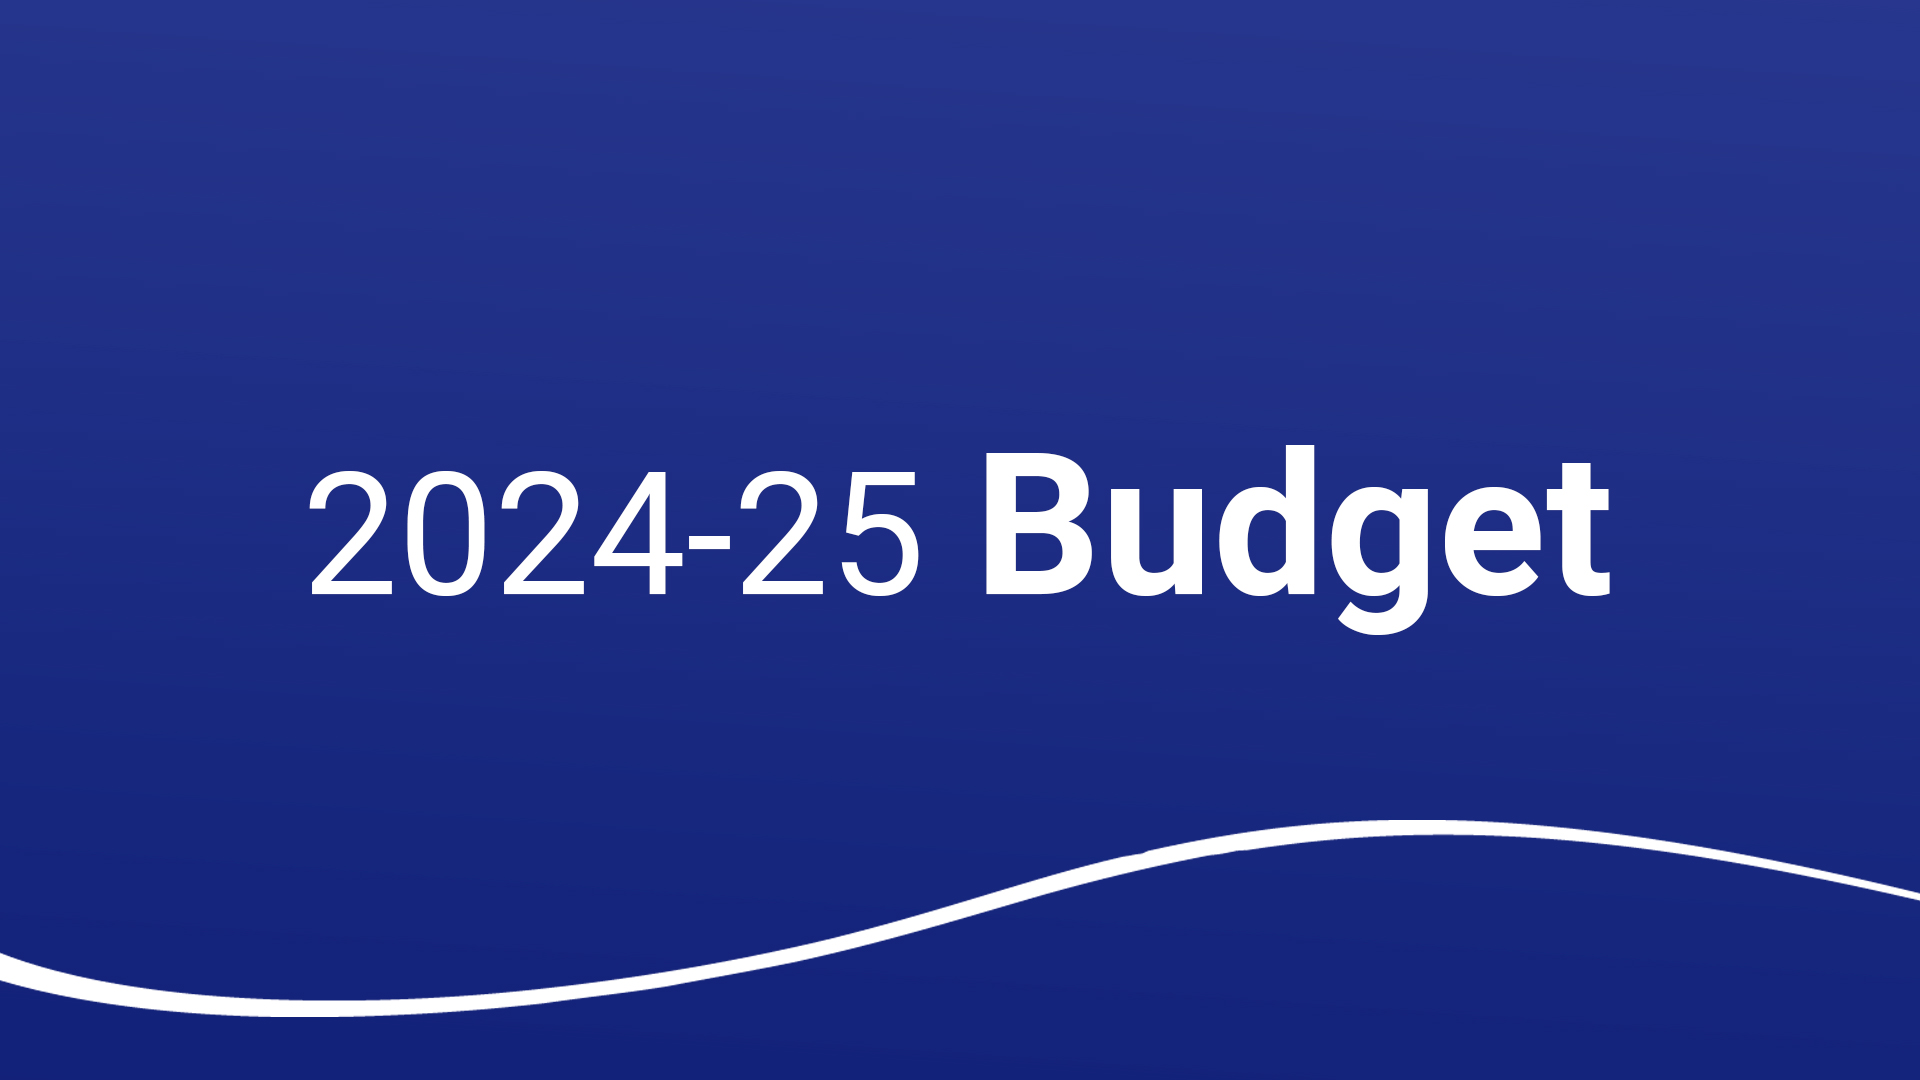 How the 2024-25 Budget will Impact the Care Industry in Australia?